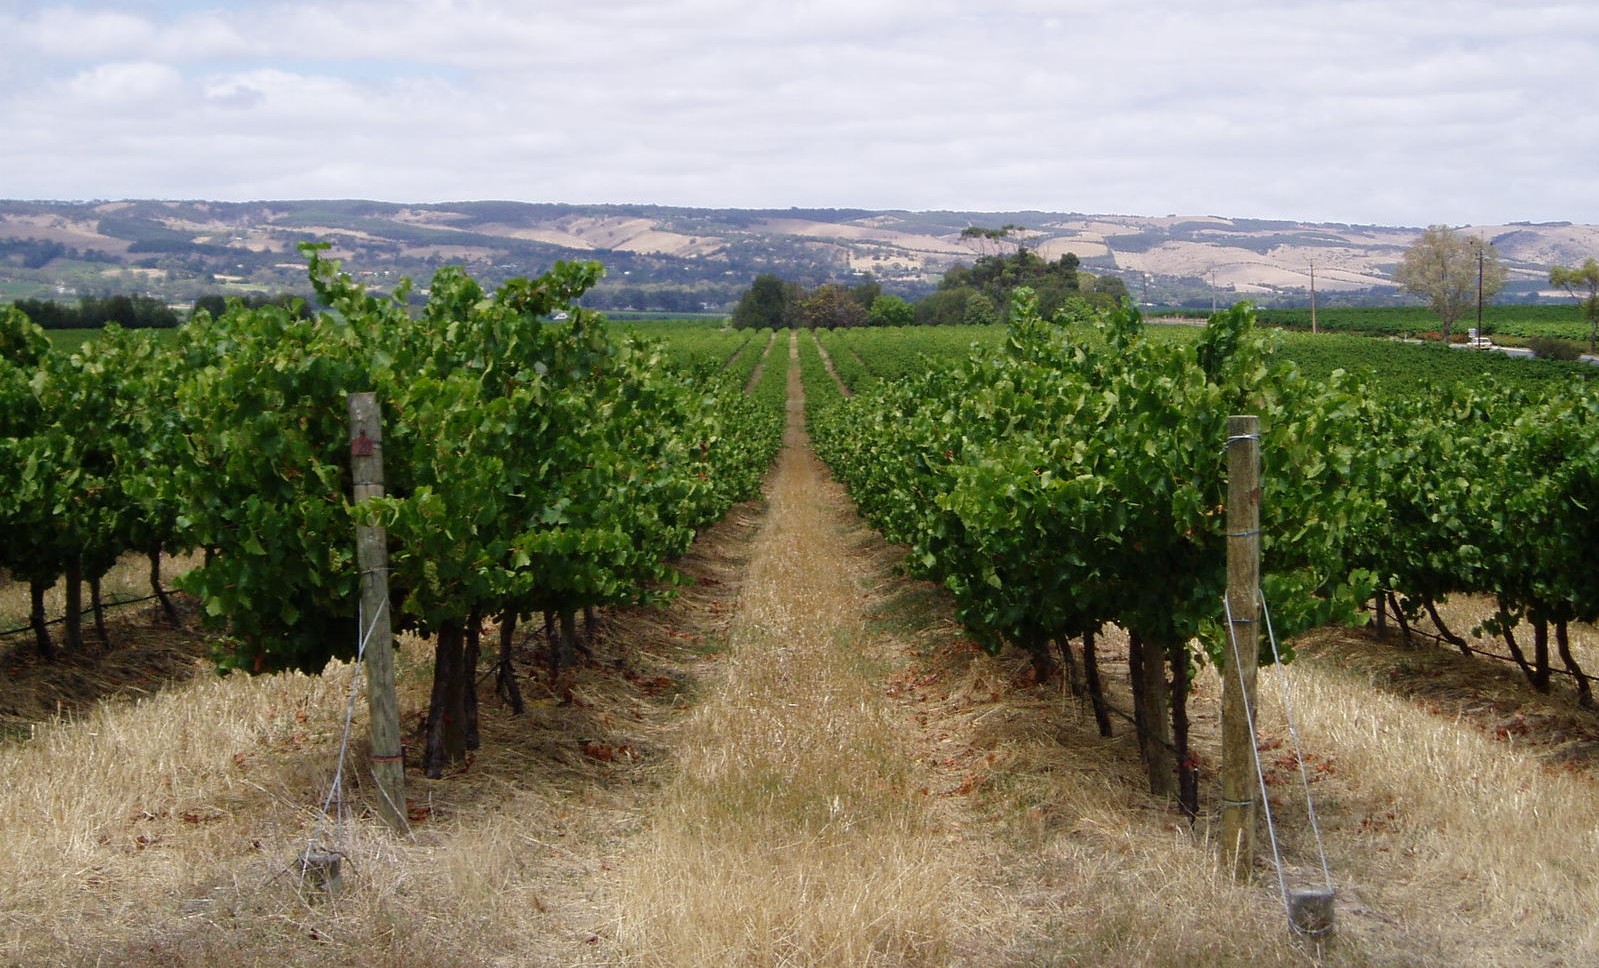 Numbers-driven vineyard management